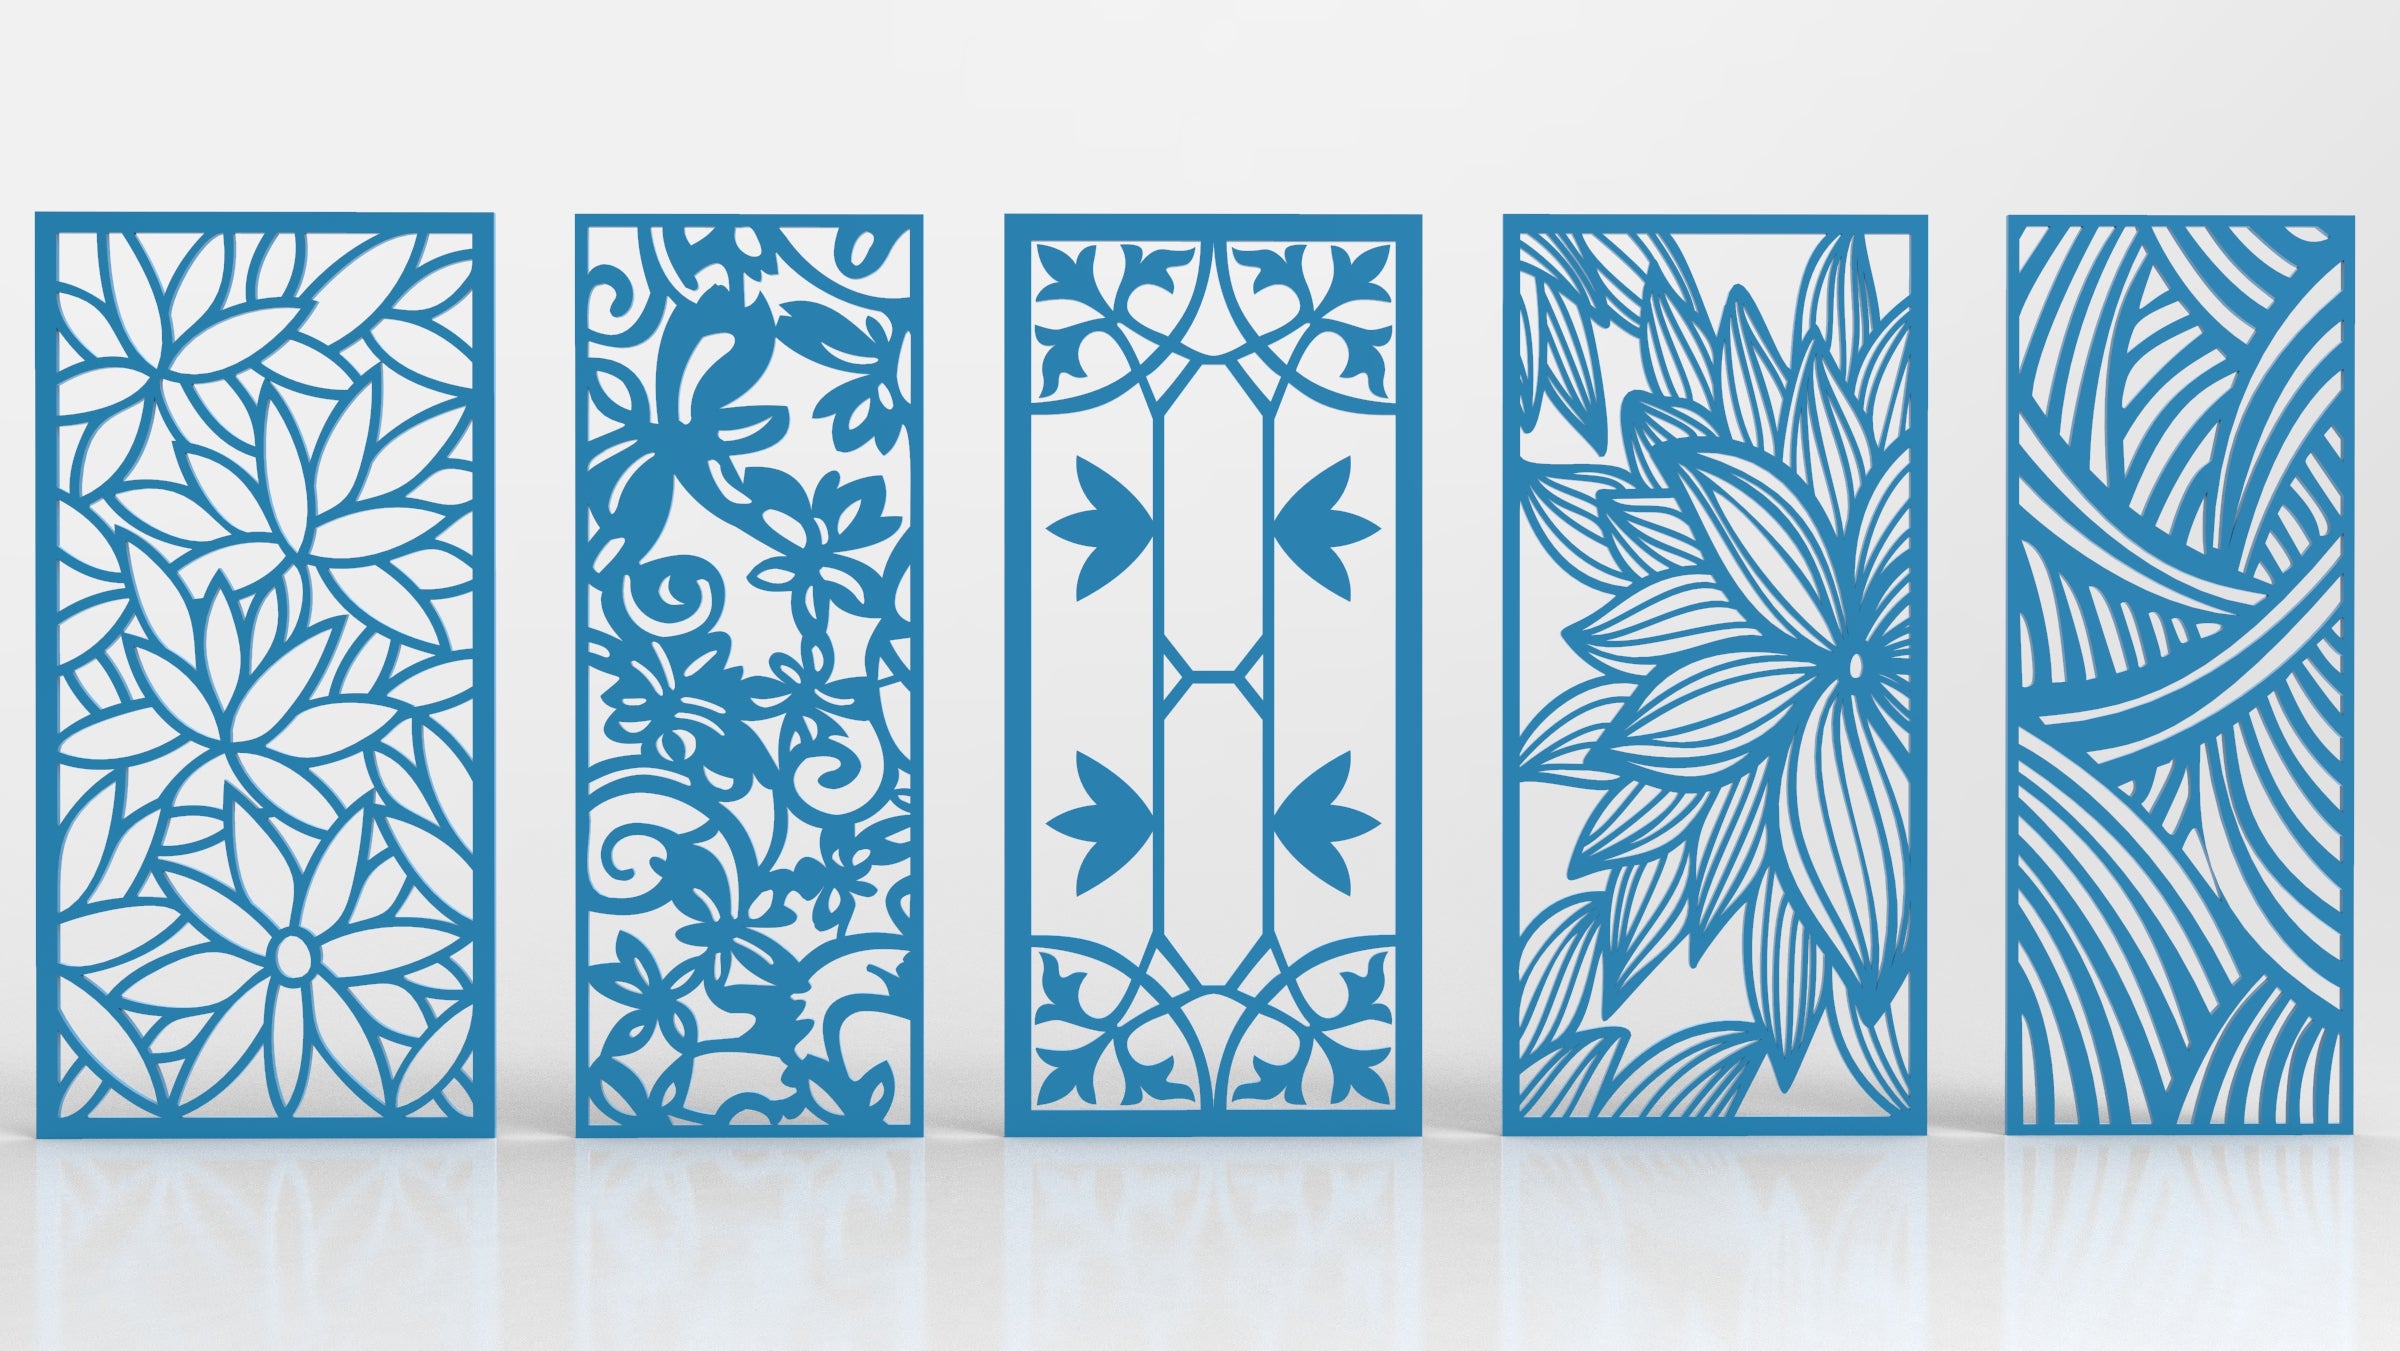 Ornaments for decorative partitions panel screen CNC Laser Cutting File | SVG, DXF, AI |#C022|